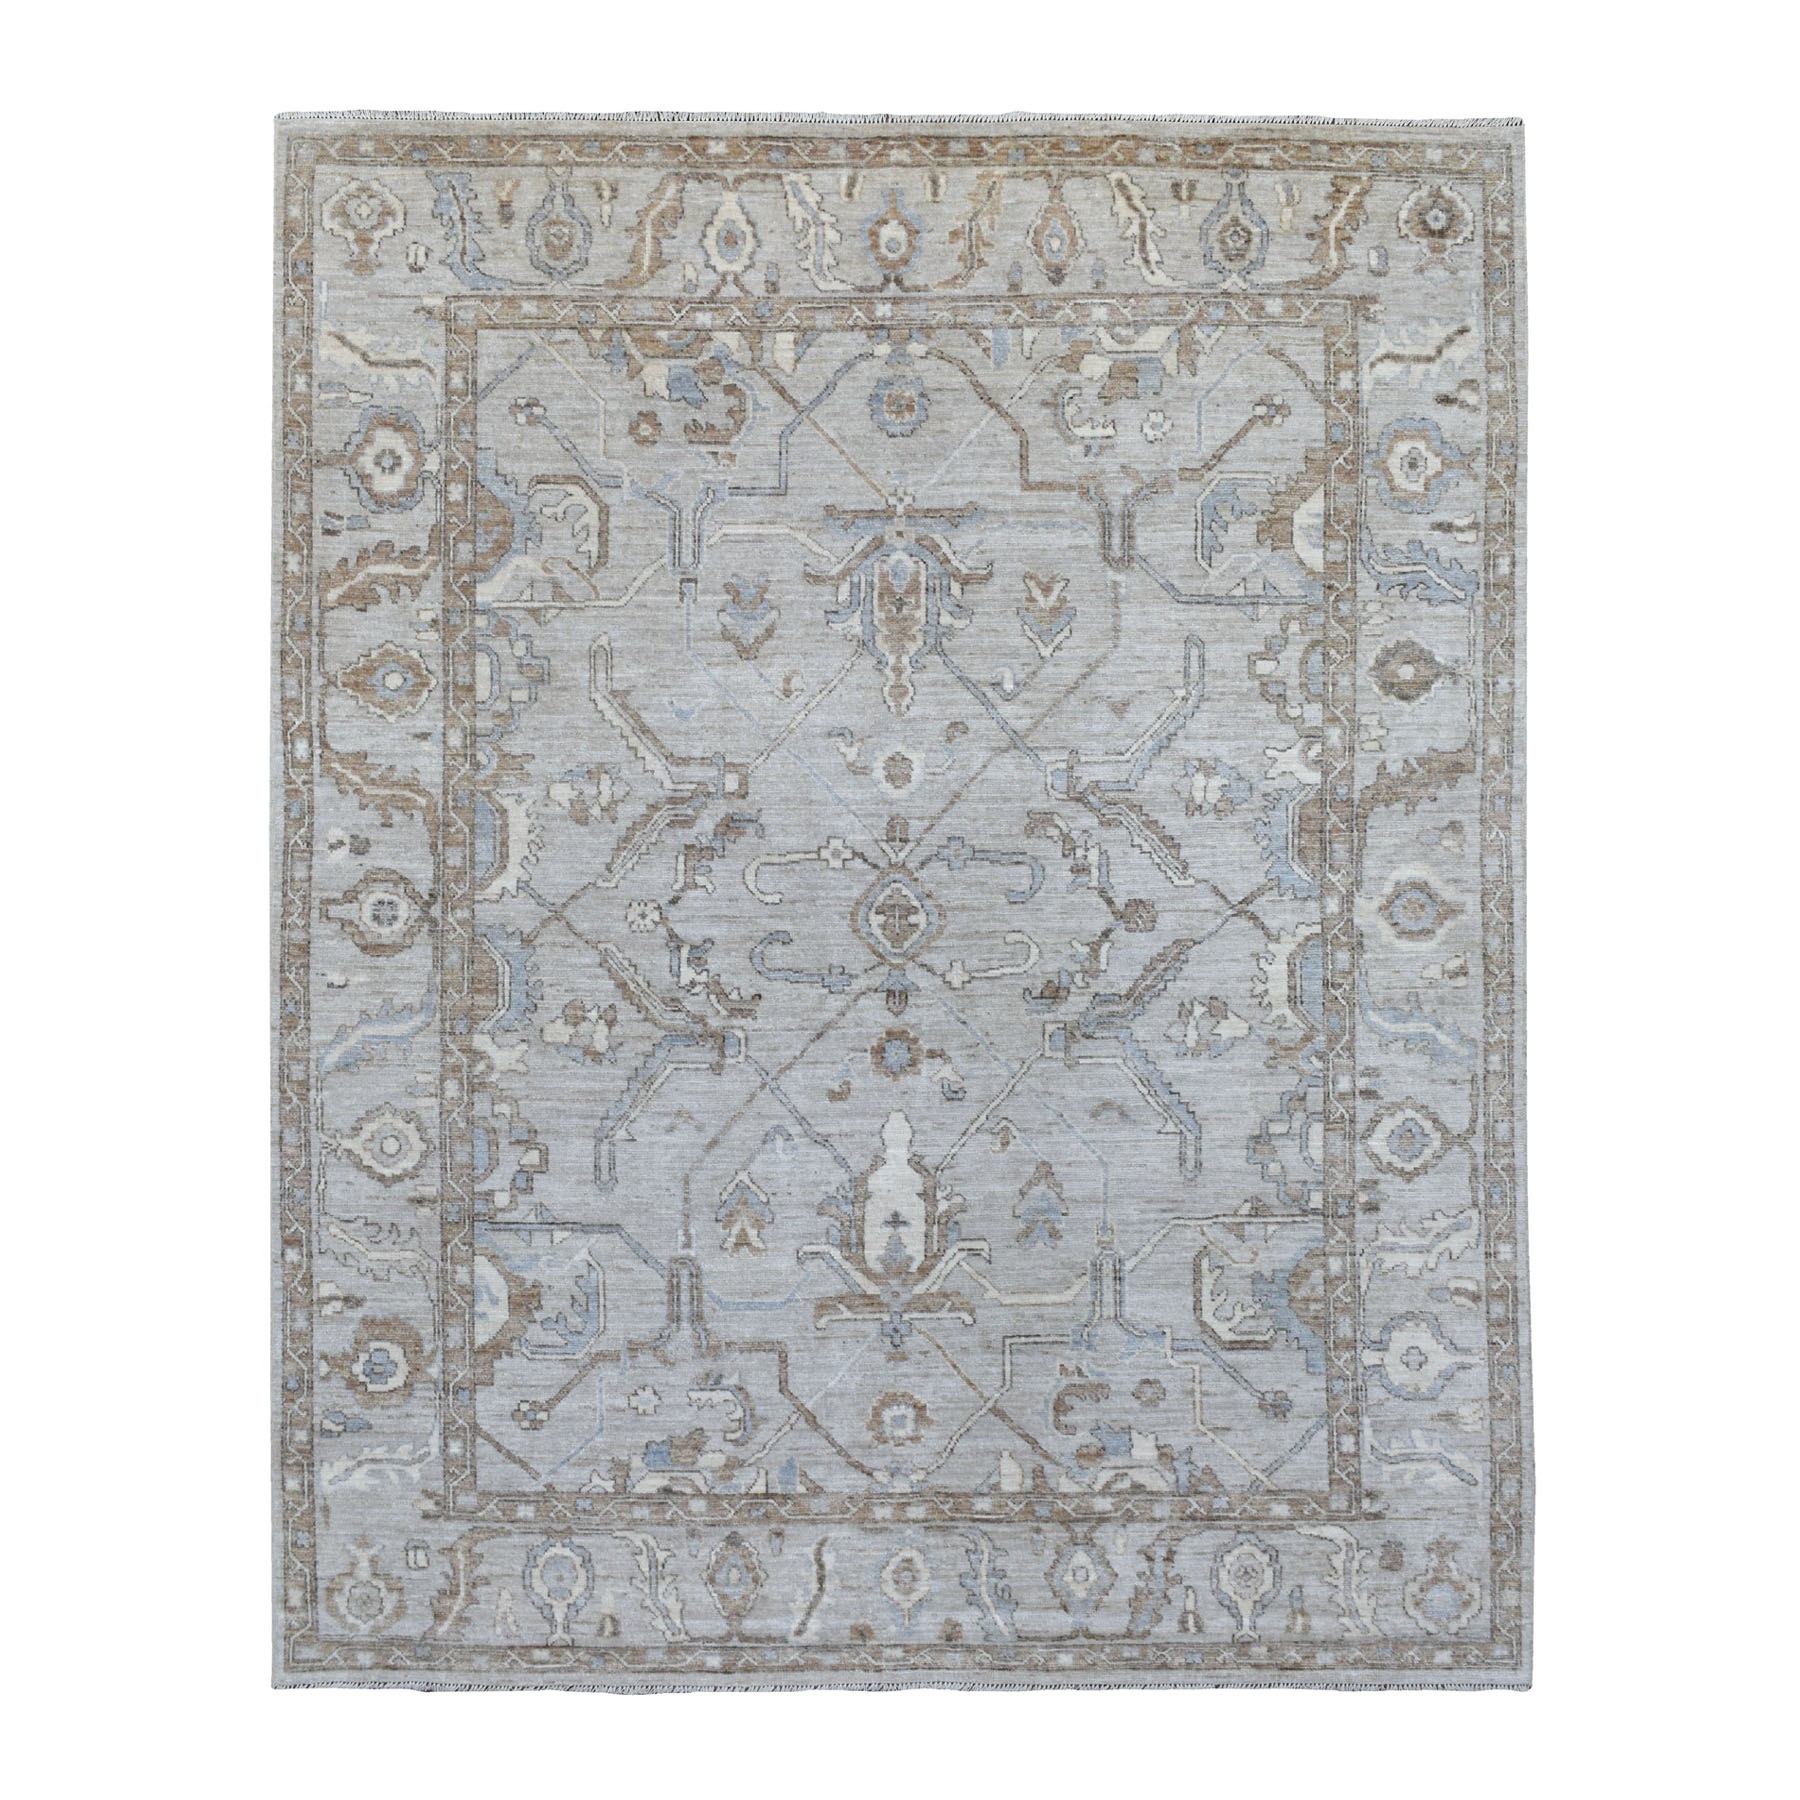 Agra And Turkish Collection Hand Knotted Grey Rug No: 1113120